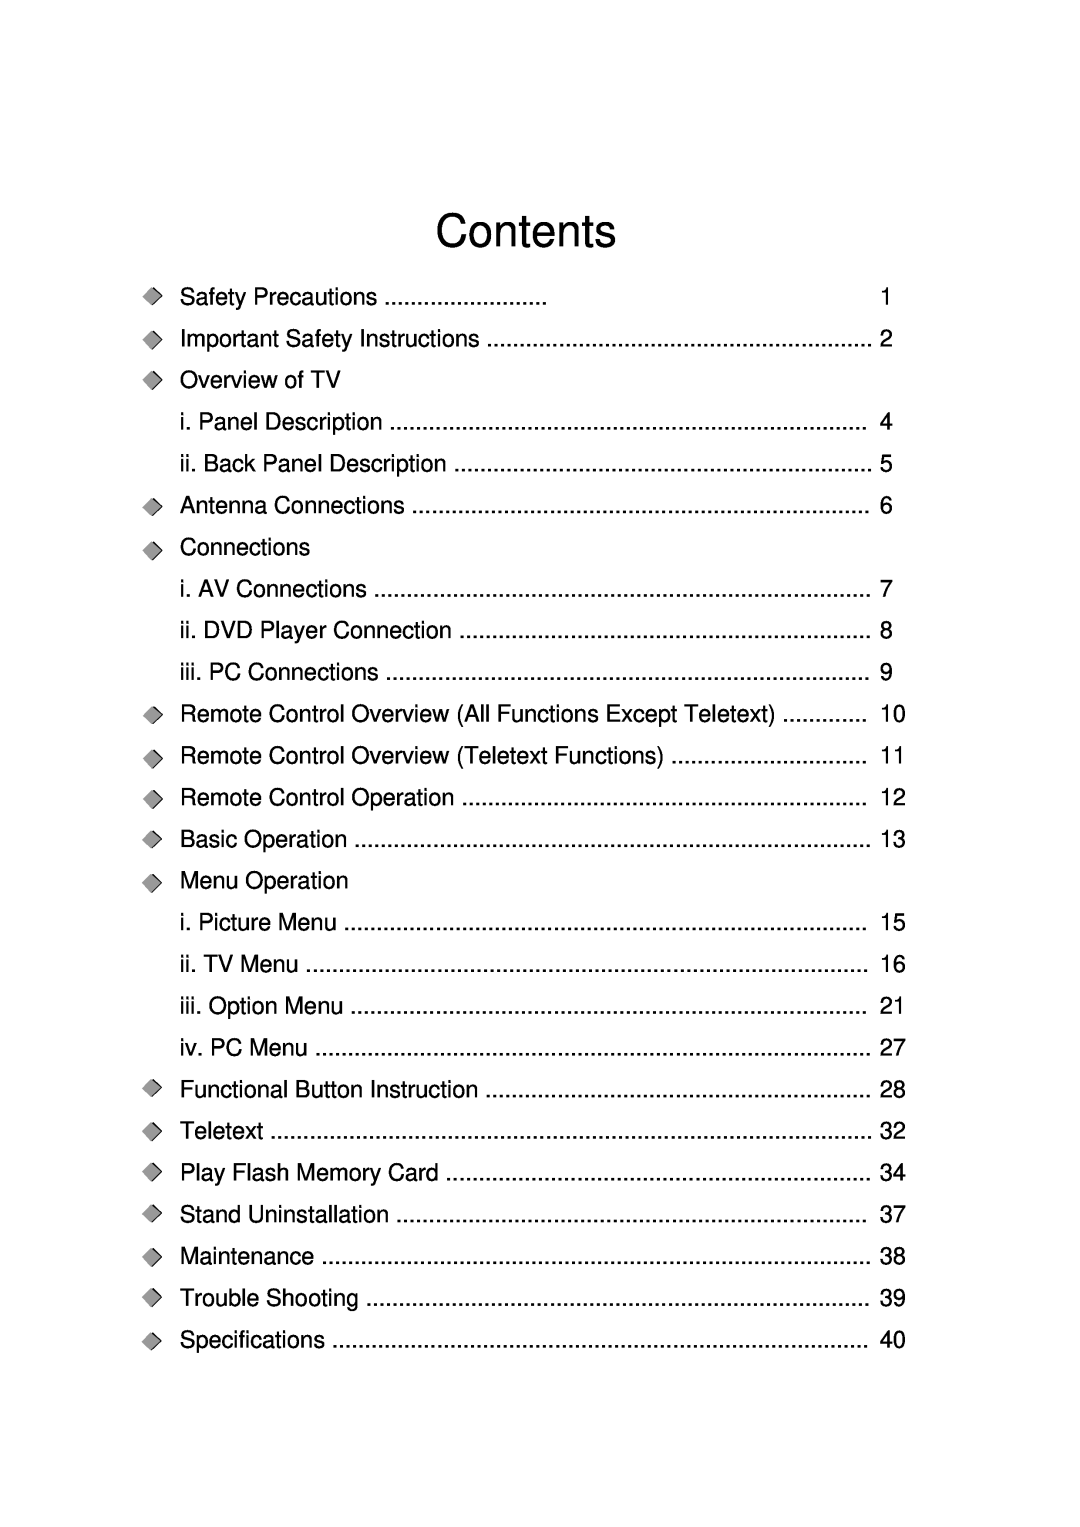 Palsonic TFTV-430 user manual Contents 